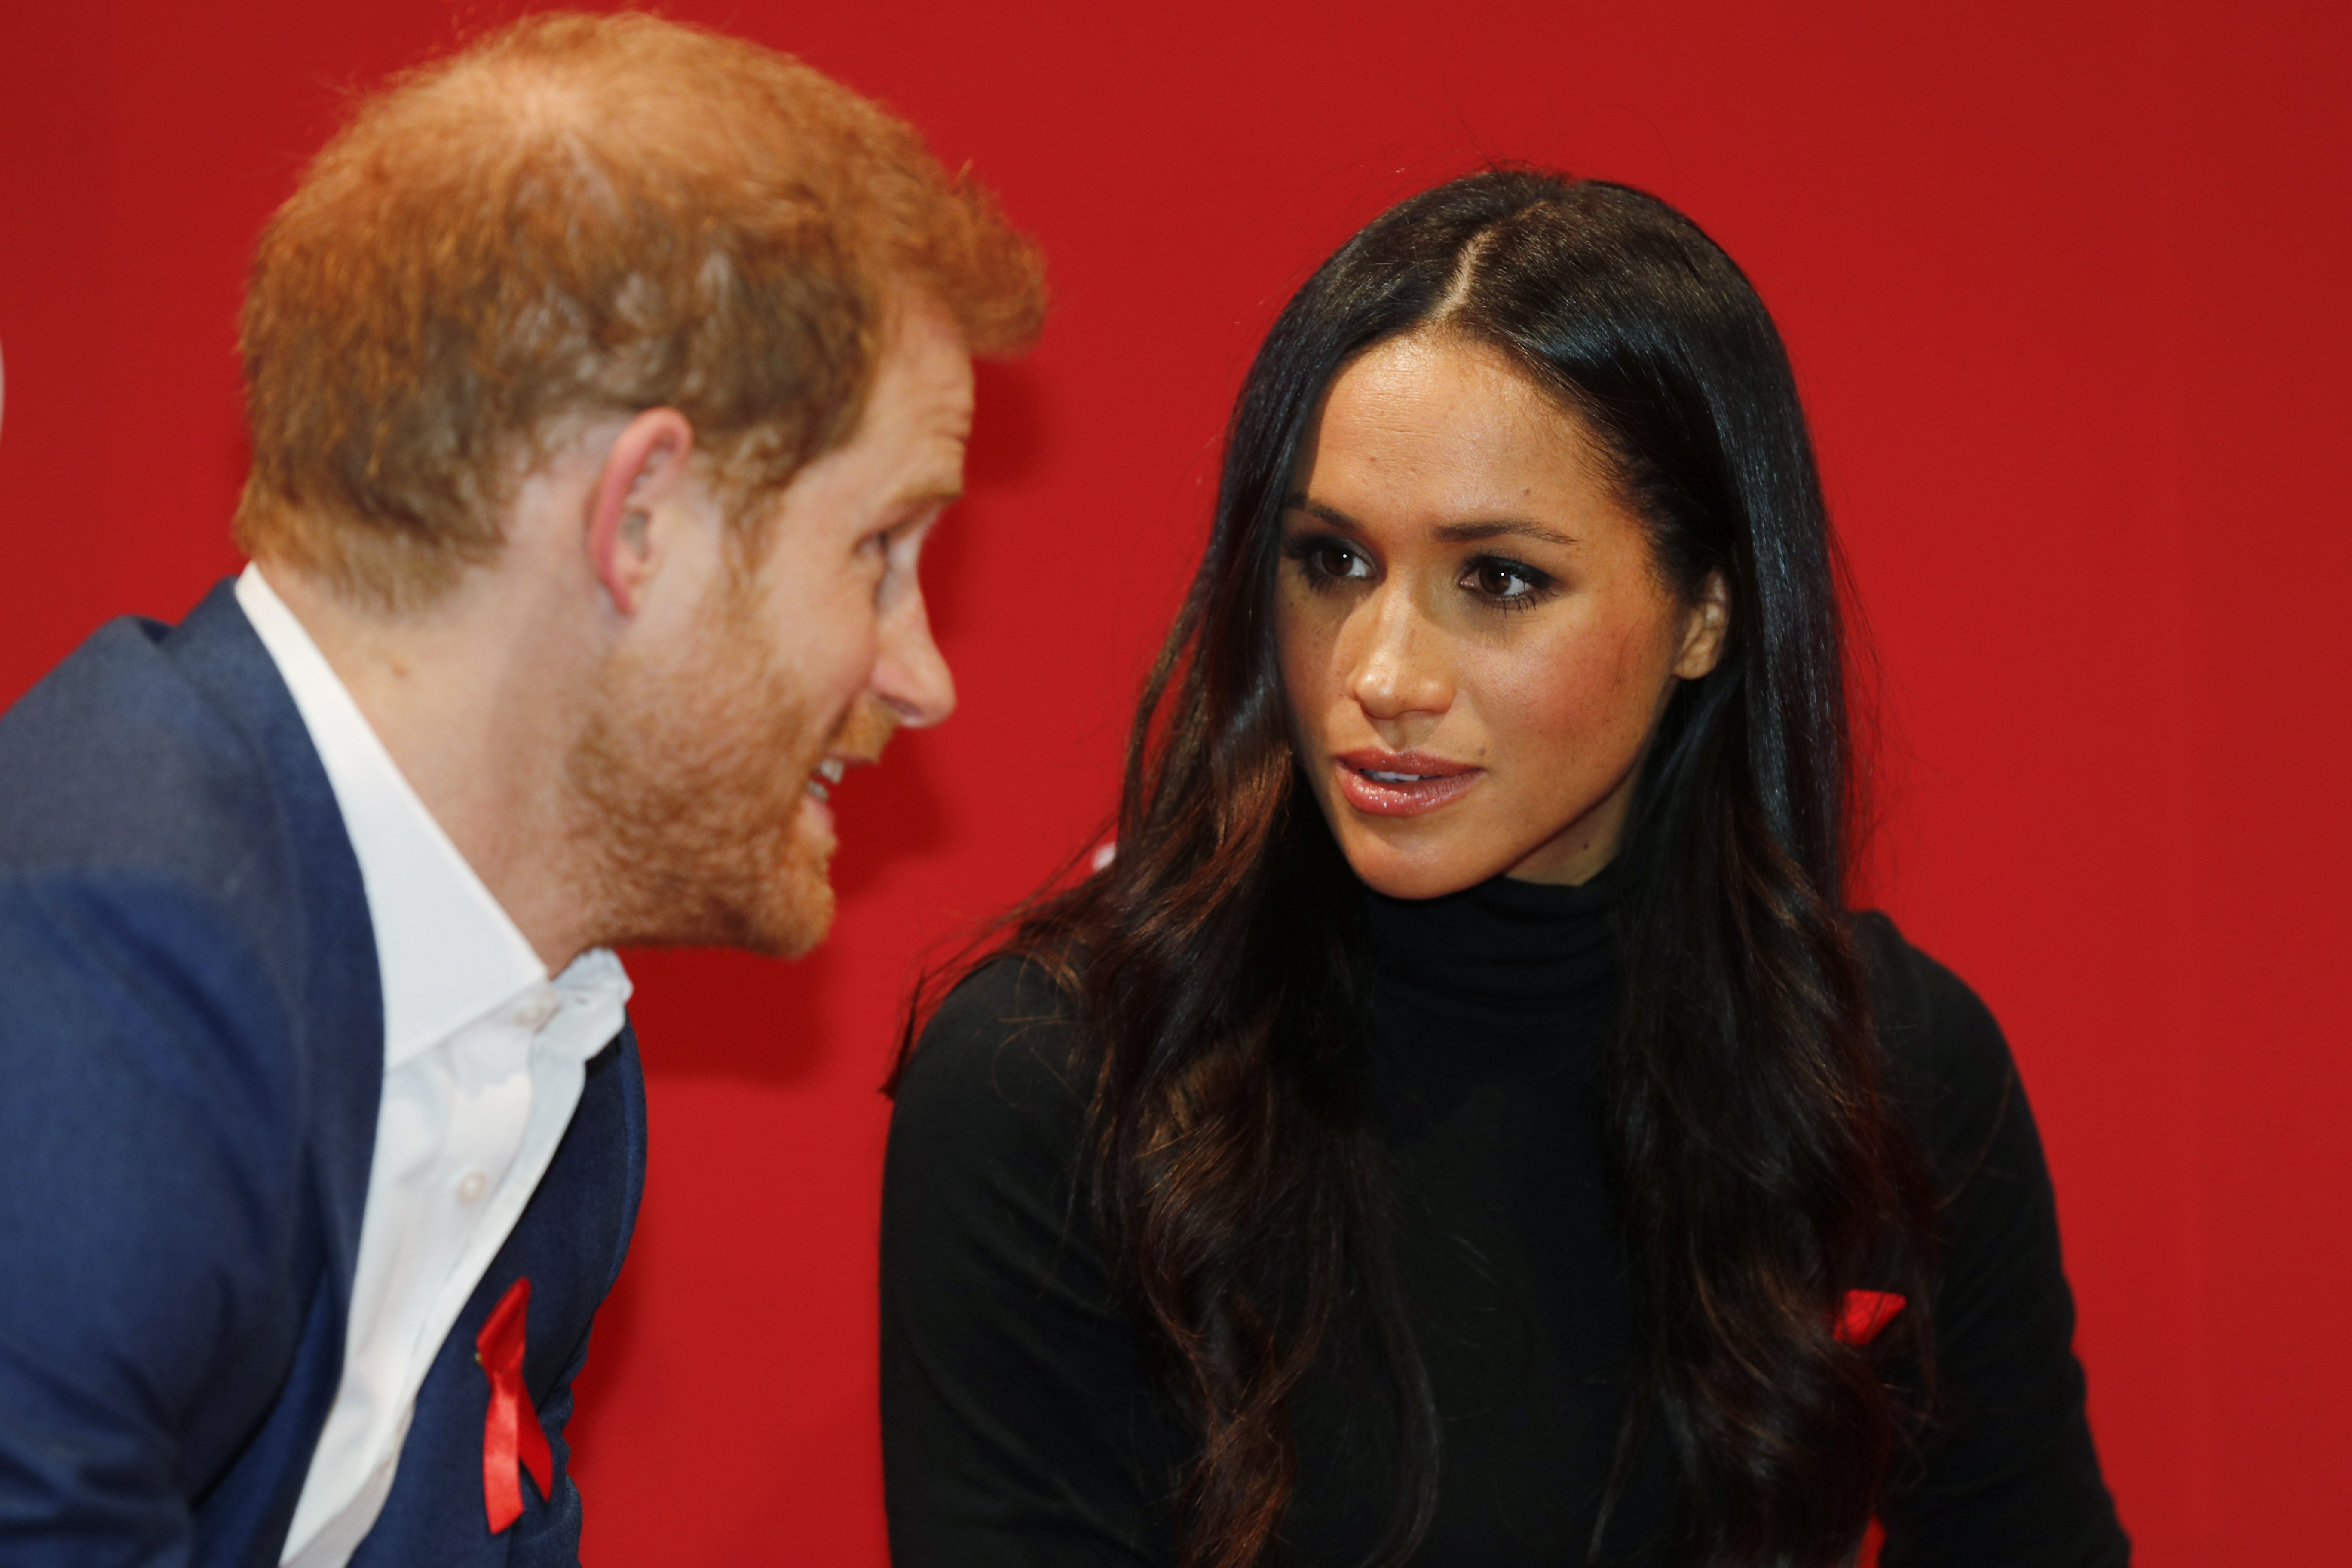 Prince Harry & Meghan Markle at the Terrence Higgins Trust World AIDS Day charity fair on Dec. 1, 2017 in England | Photo: Getty Images